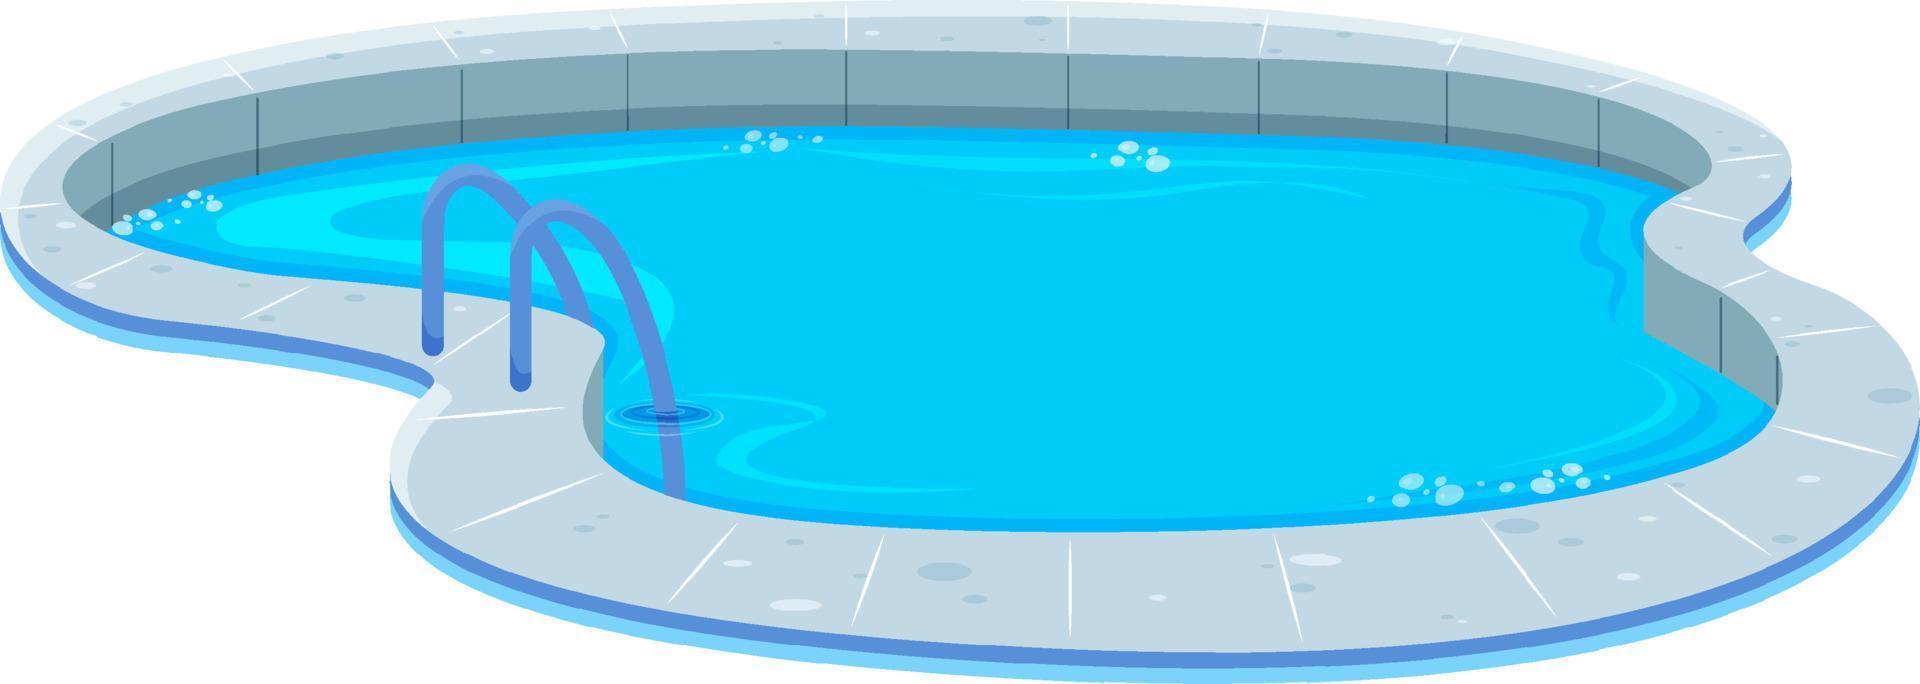 Isolated empty pool on white background vector